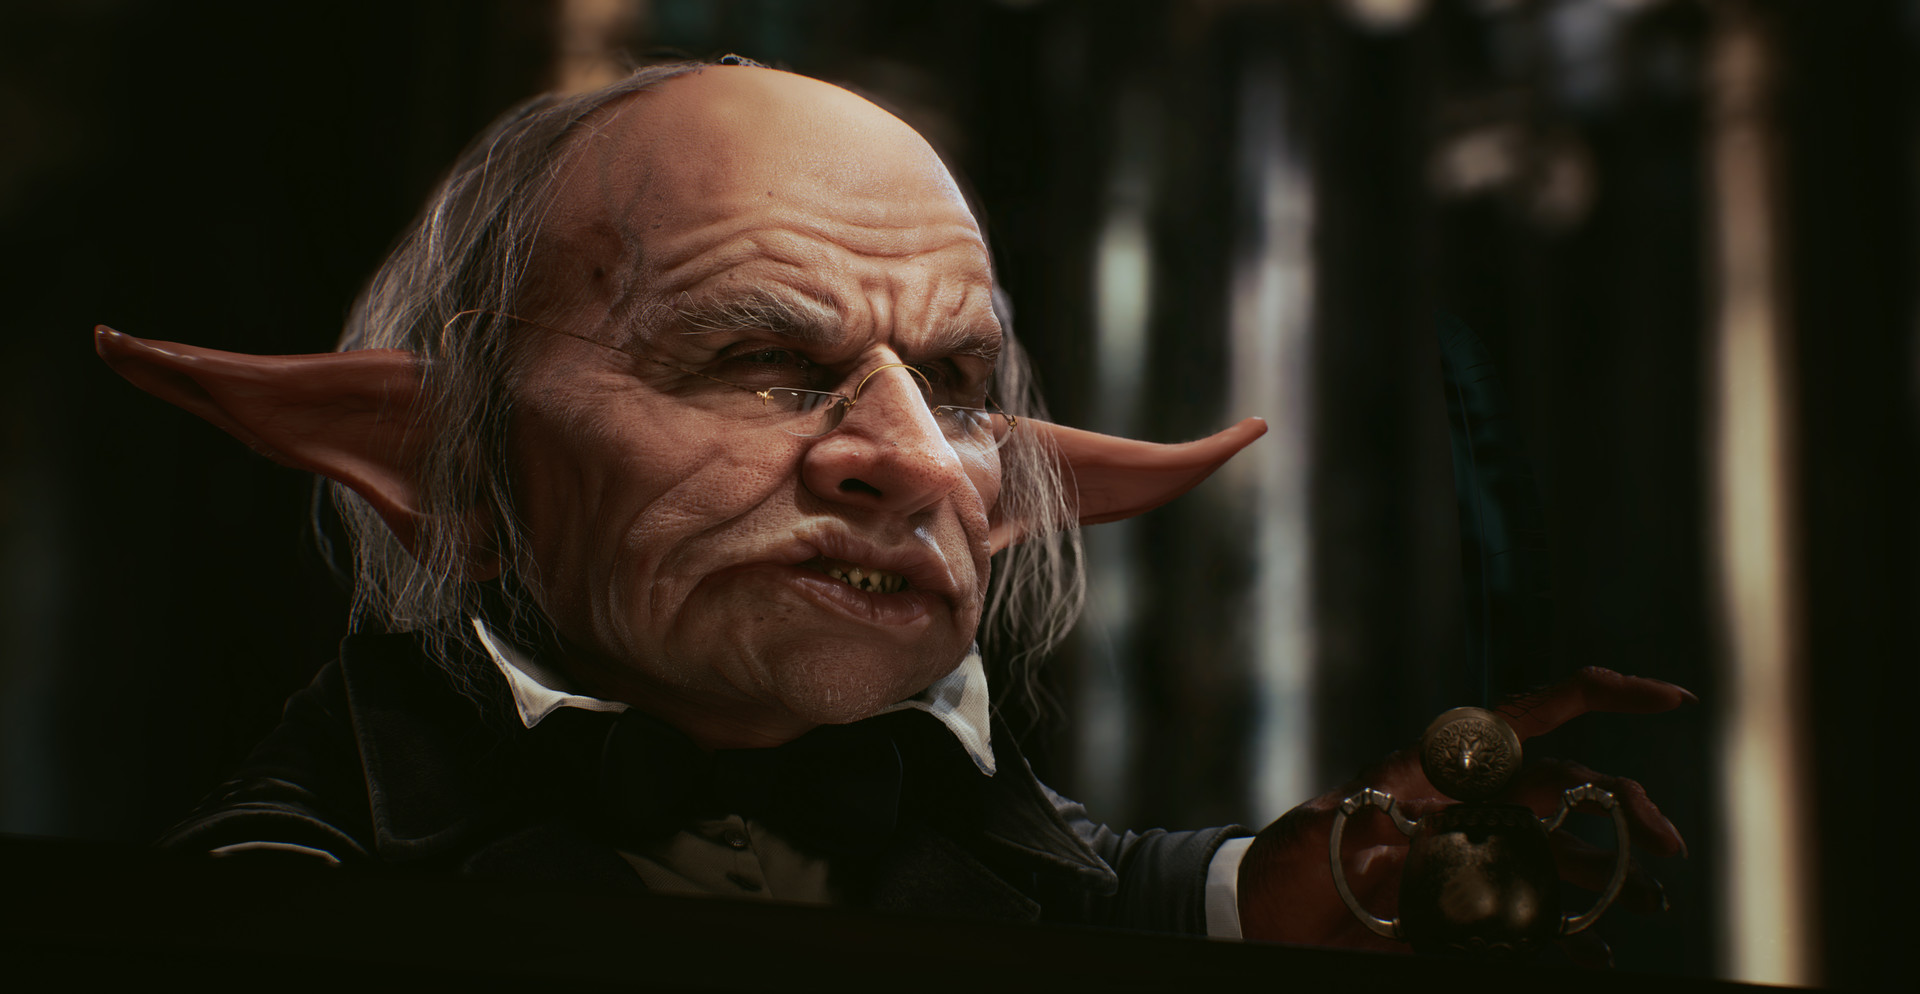 Goblin From Harry Potter -- Realtime UE 4 project by Baolong Zhang